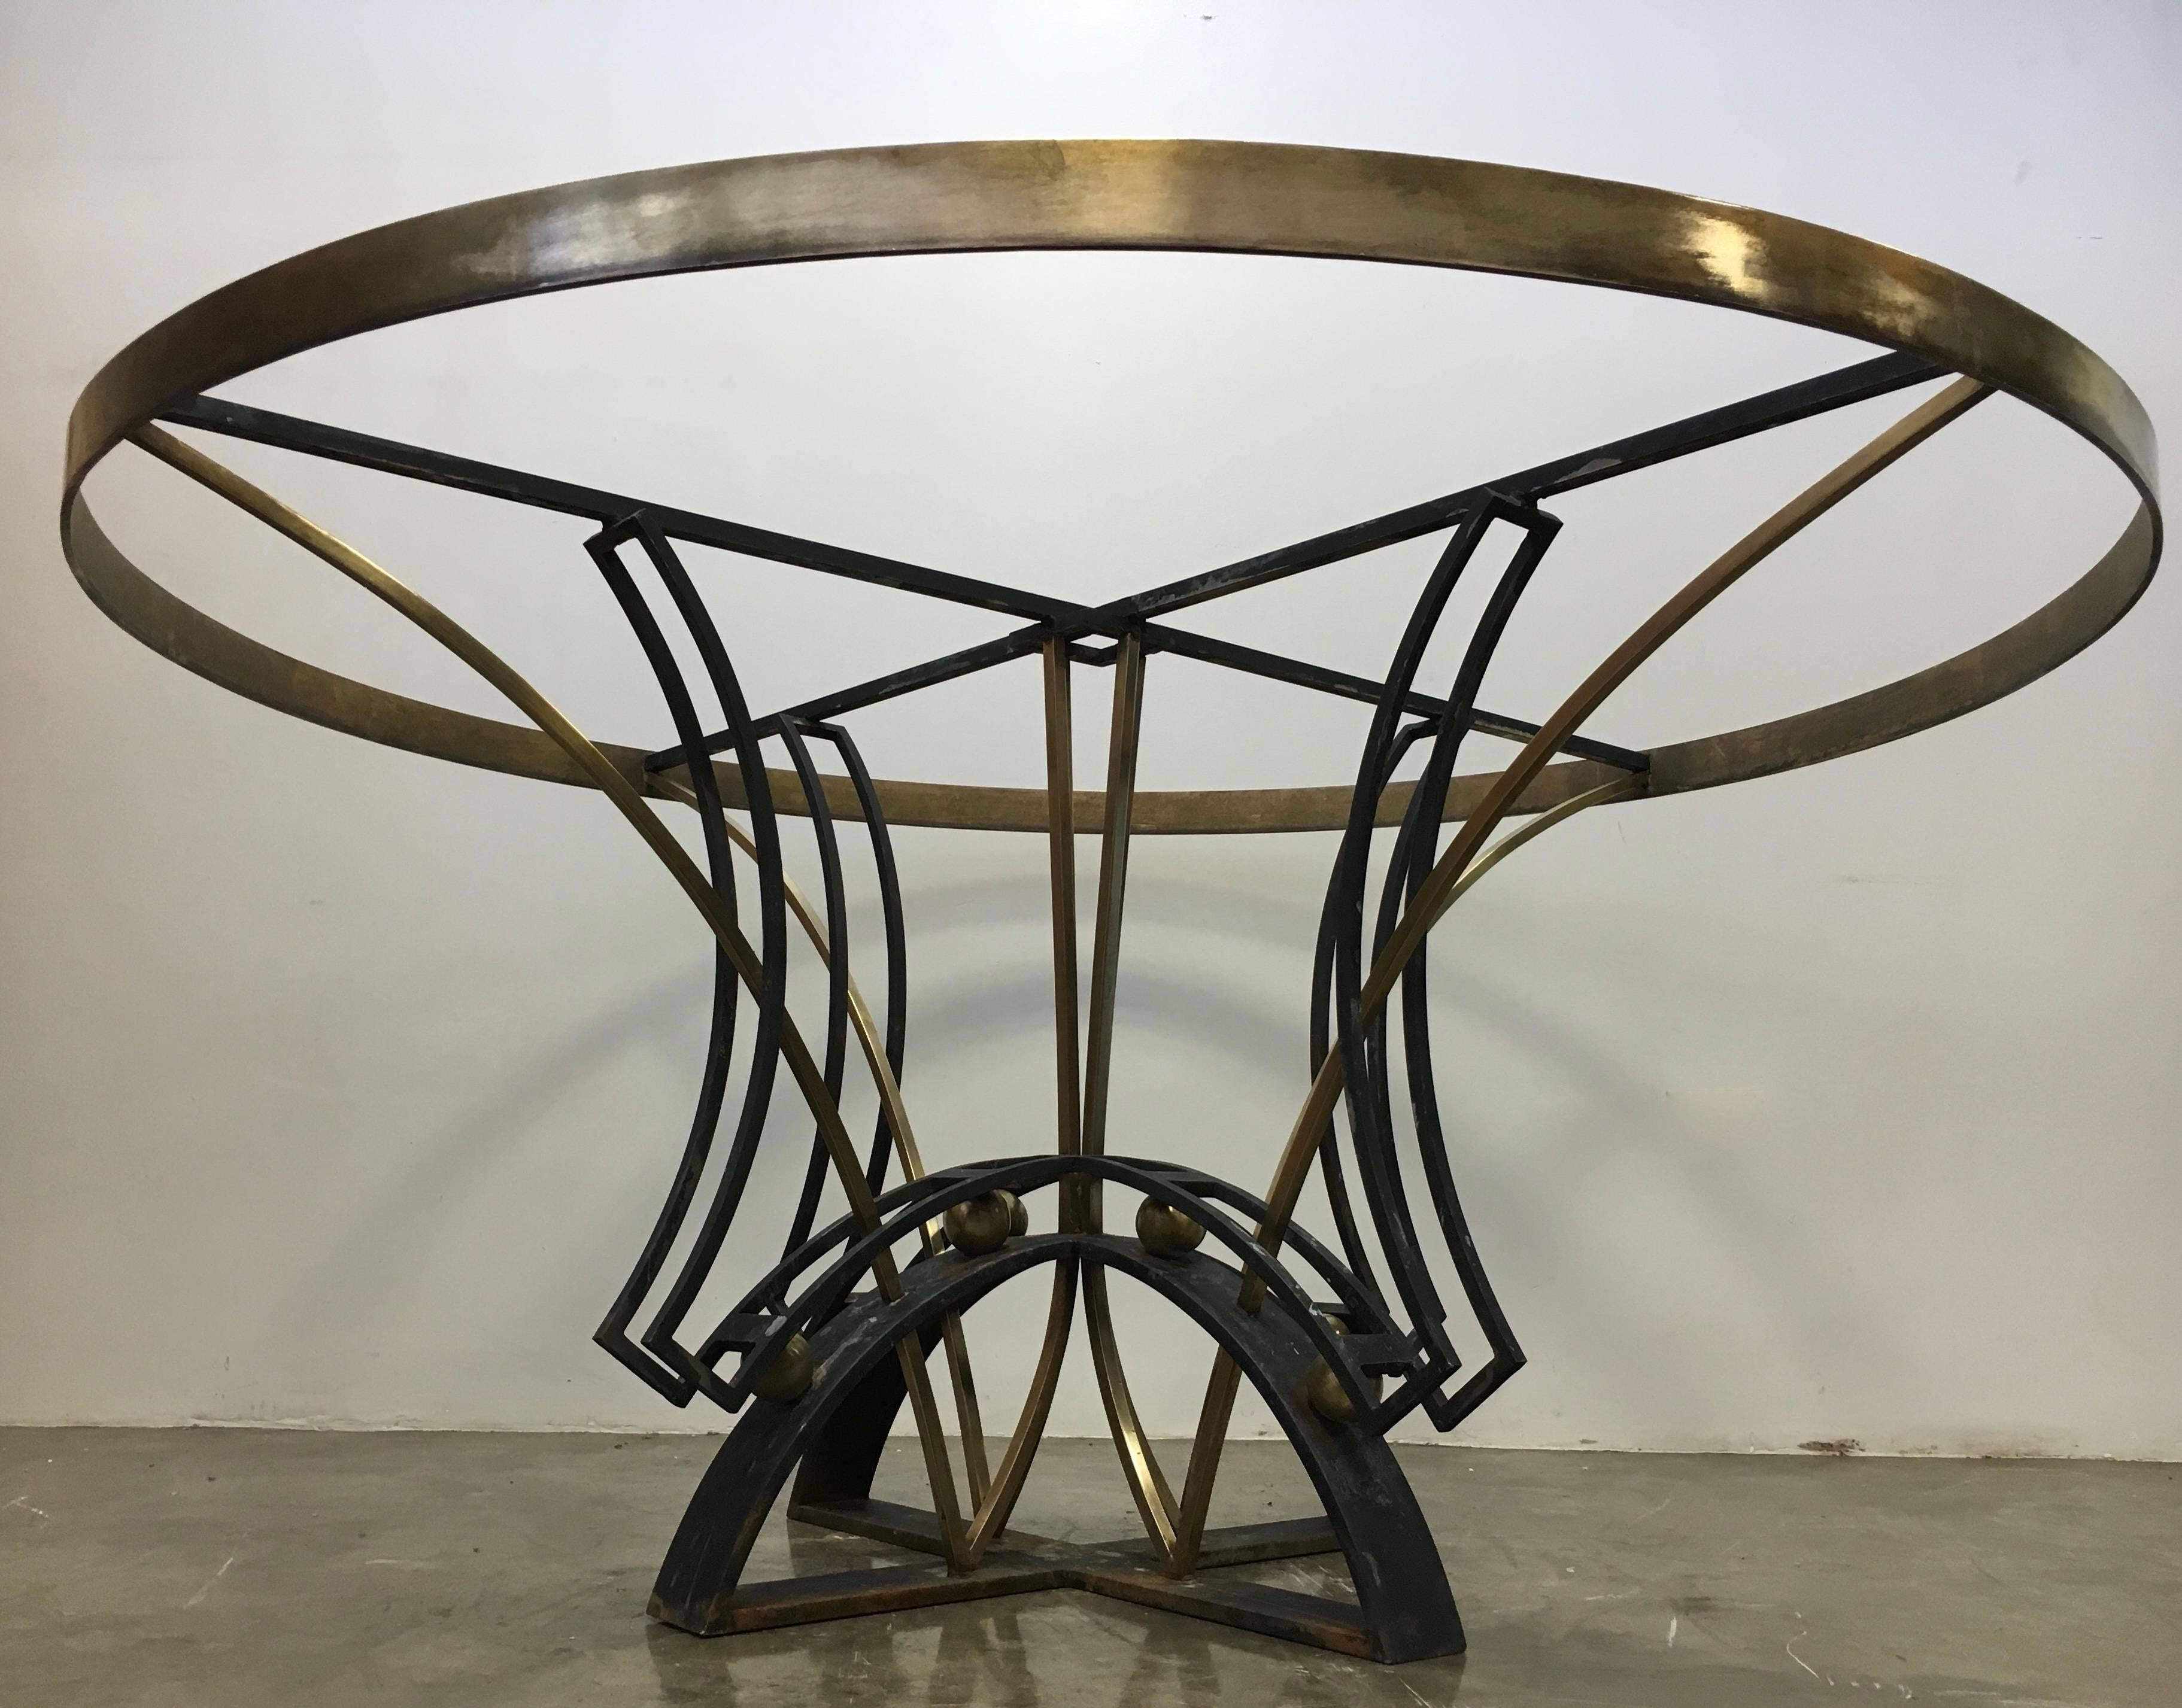 Superb Iron and Brass Round Dining Table by Arturo Pani, Mexico City circa 1950s For Sale 4